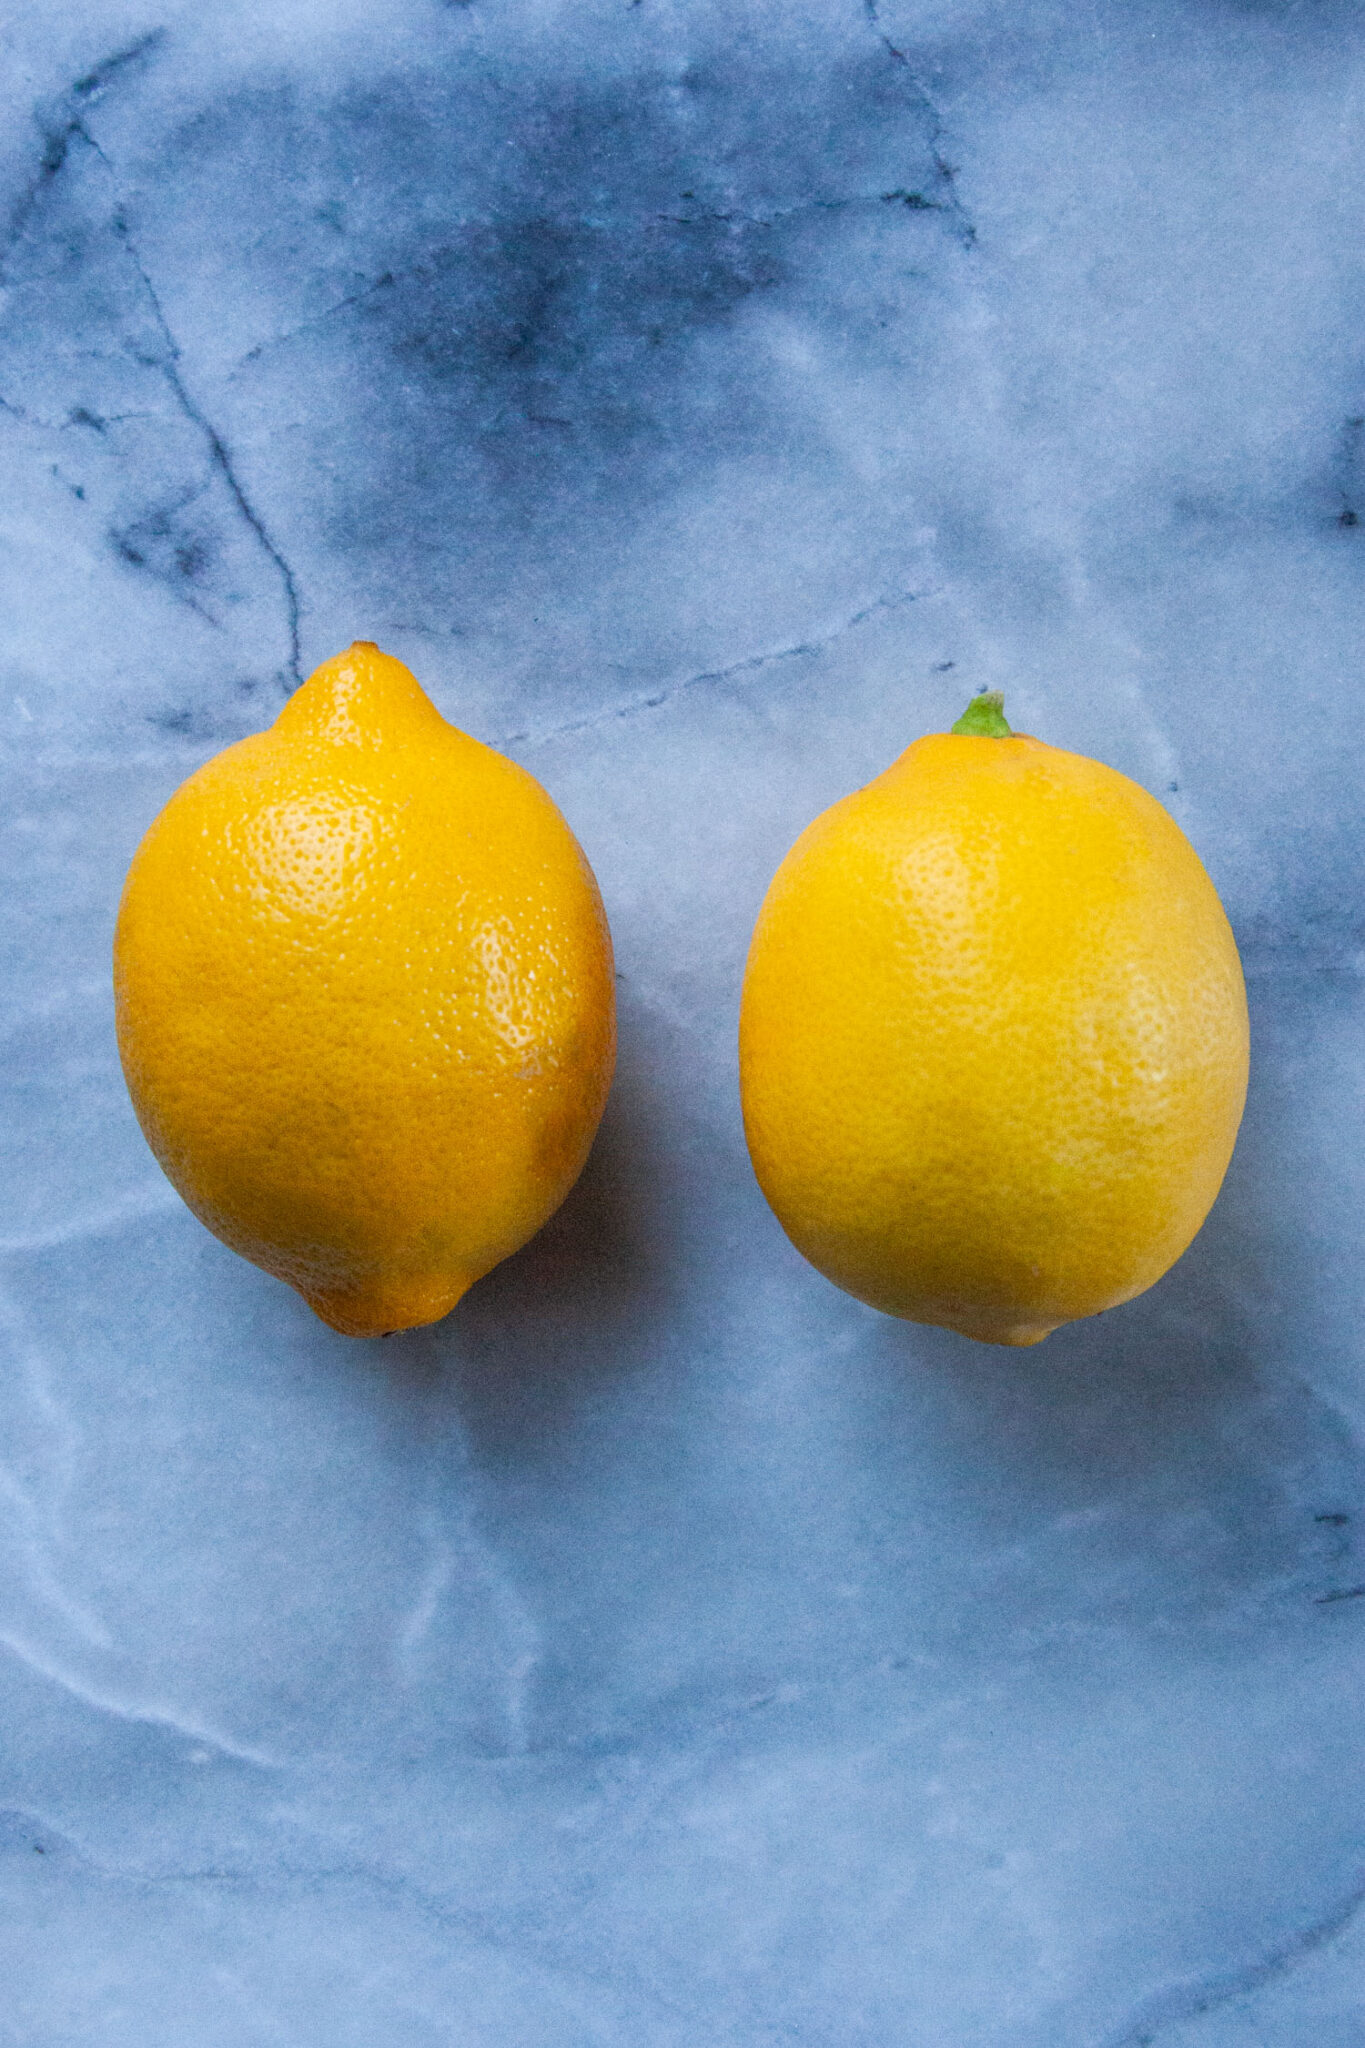 Regular lemon on the left with a slightly more pitted skin and thinner profile, and Meyer lemon on the right with a smoother skin and rounder shape.